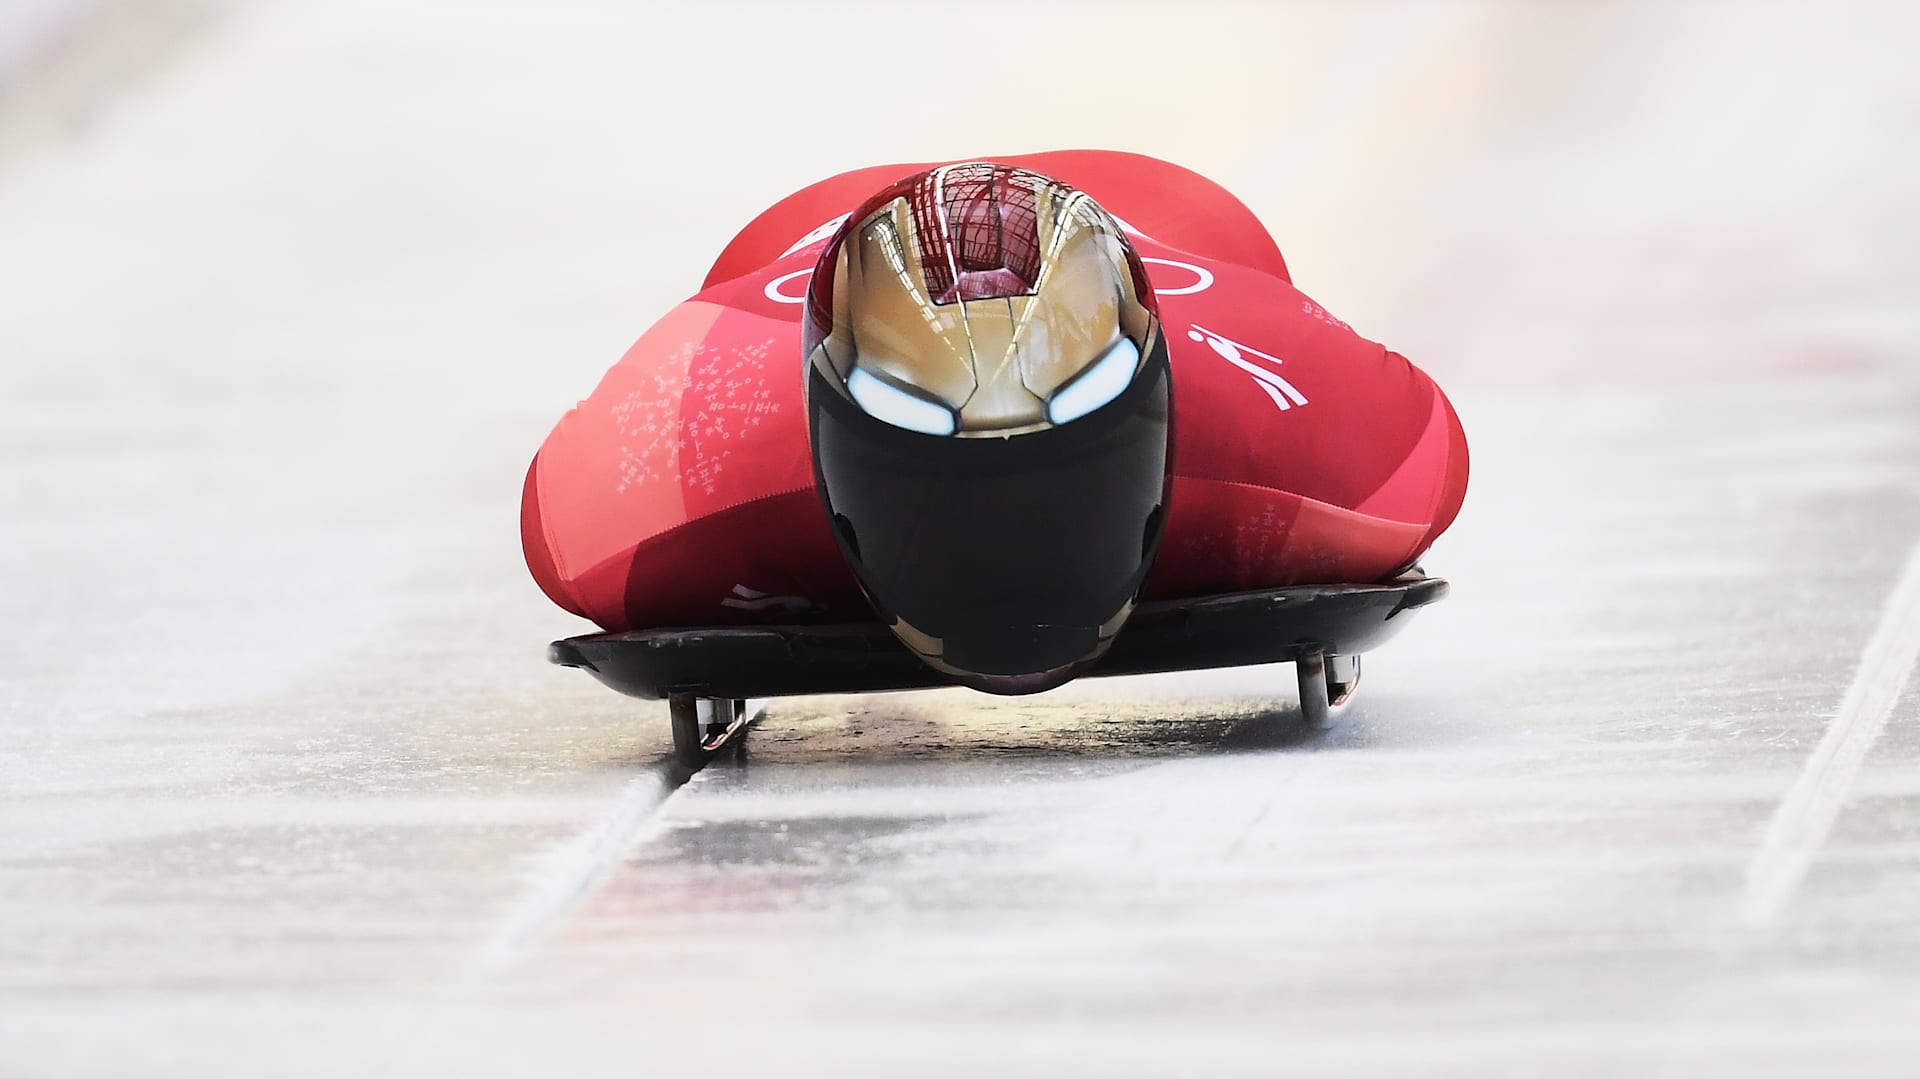 What are the differences between luge, skeleton and bobsleigh?